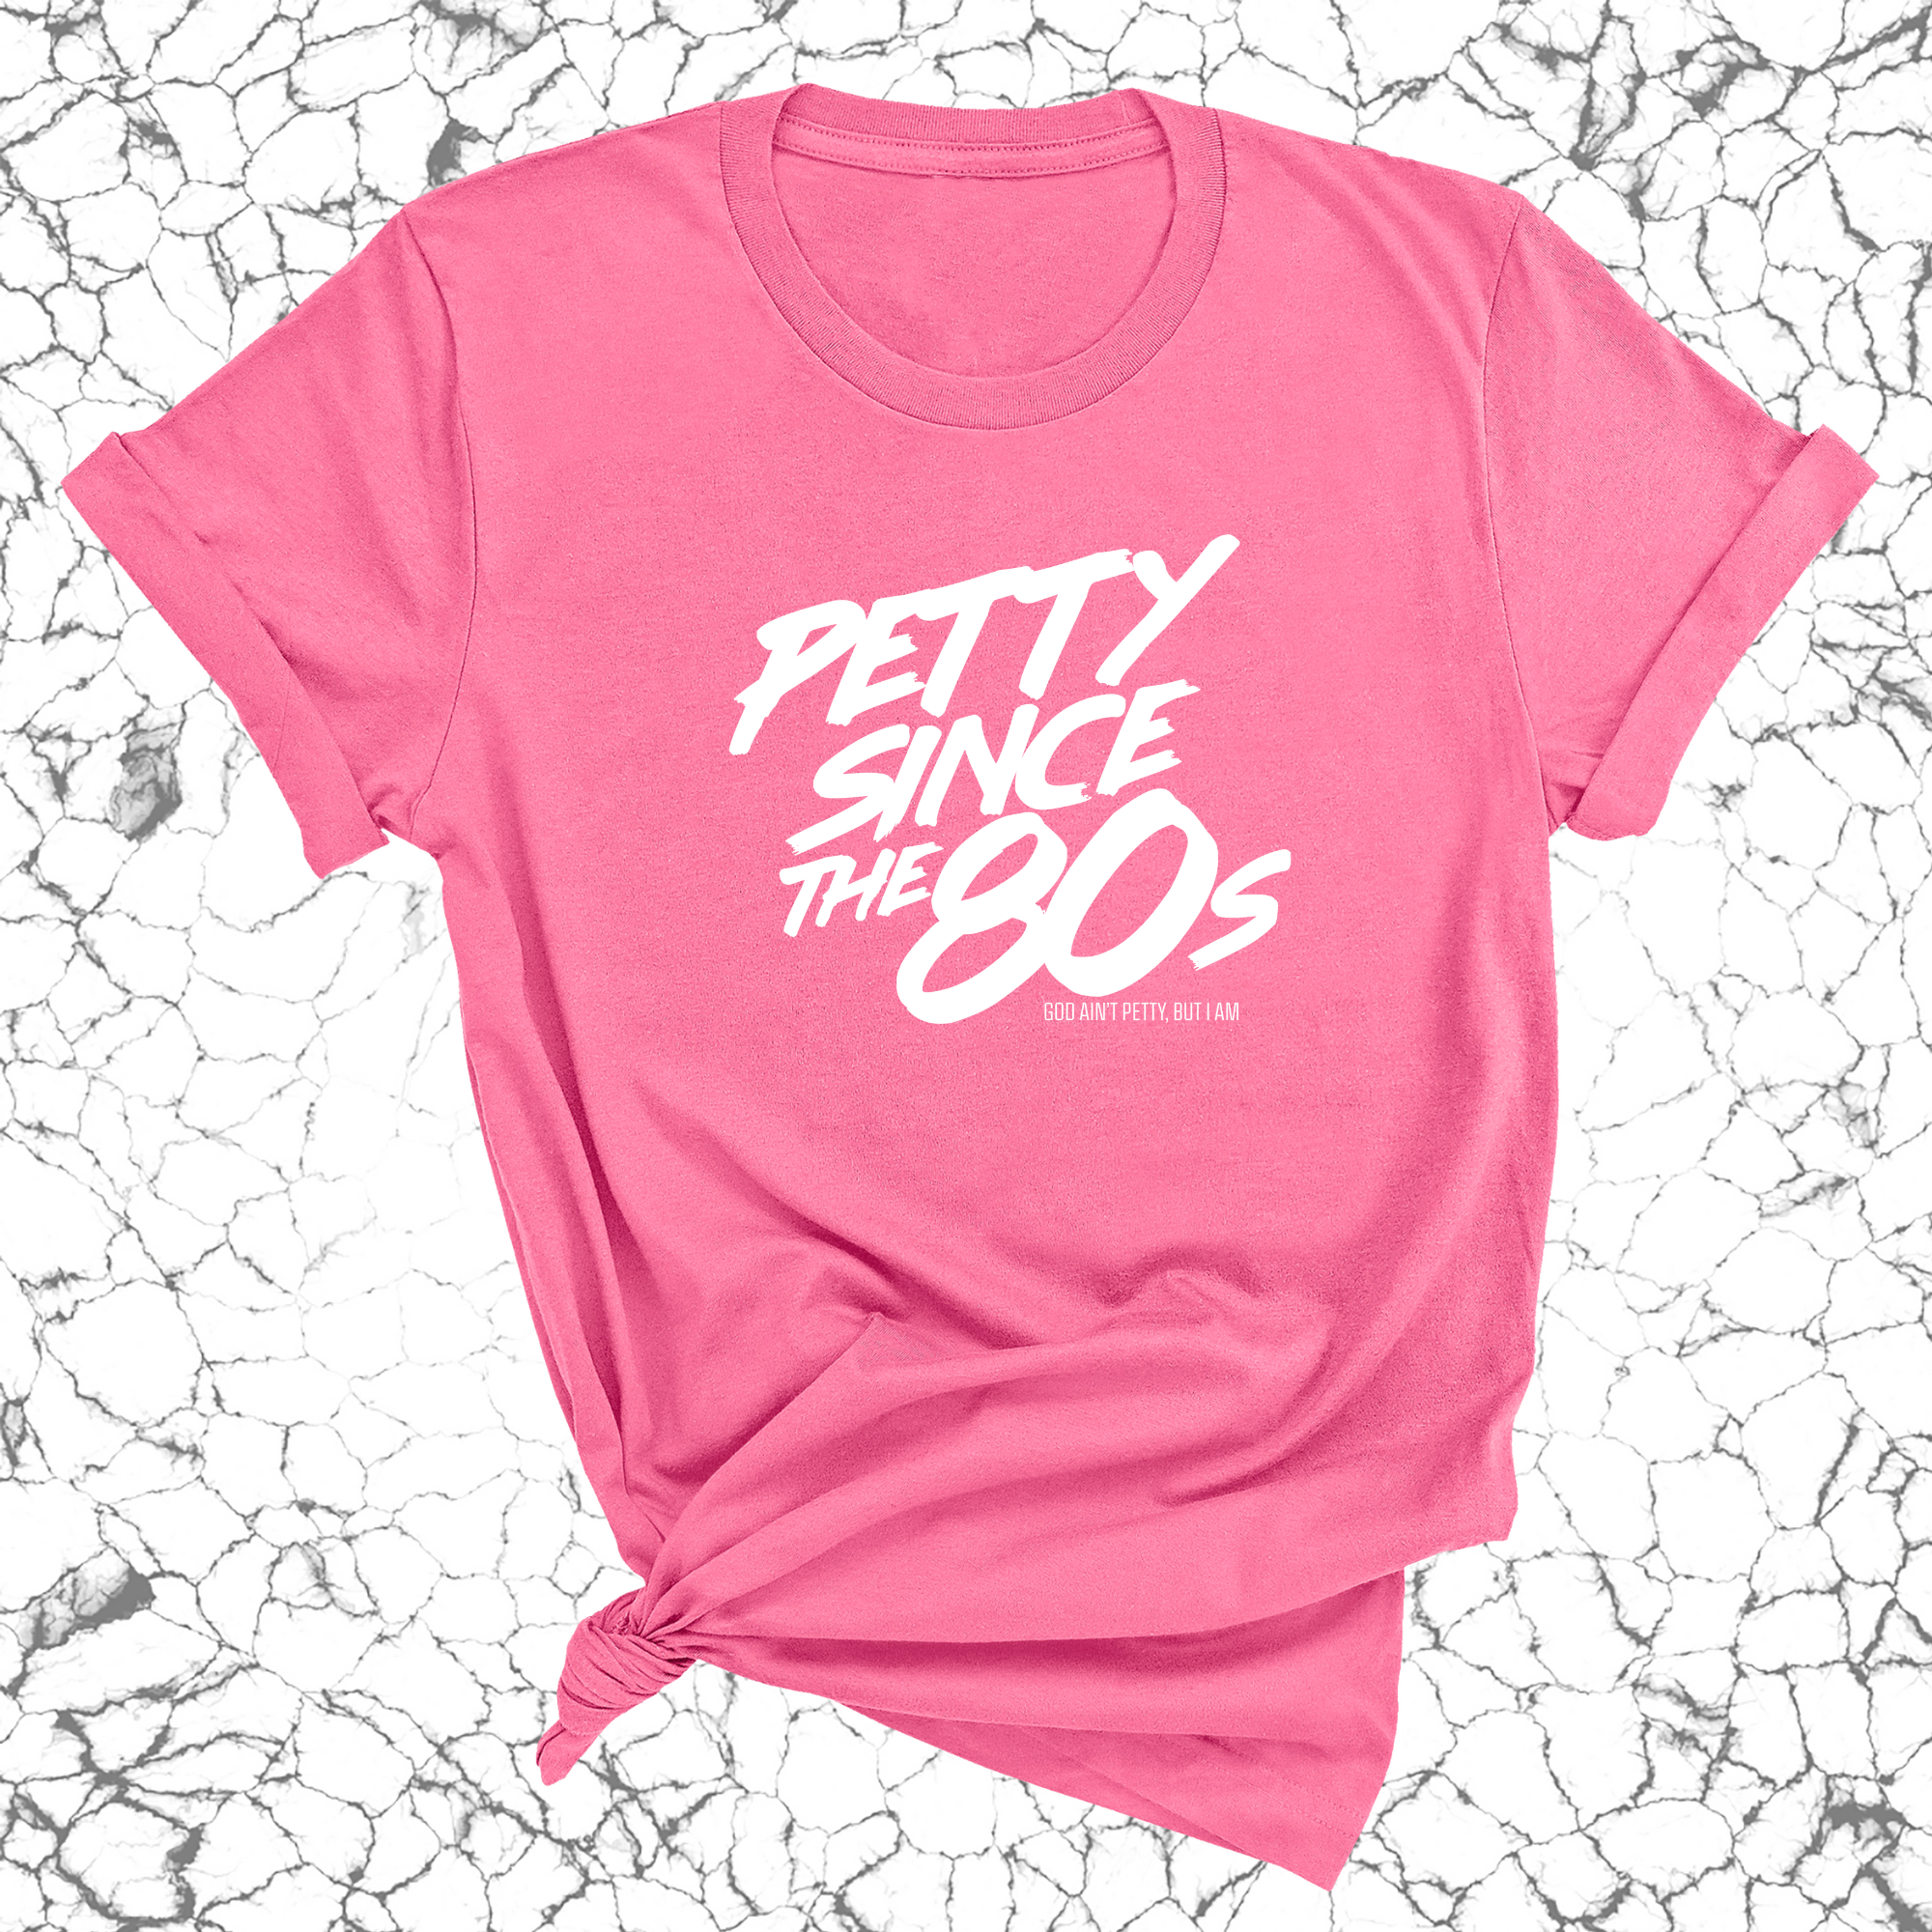 IMPERFECT - PETTY SINCE THE 80'S T-SHIRT PINK/WHITE MEDIUM-The Original God Ain't Petty But I Am